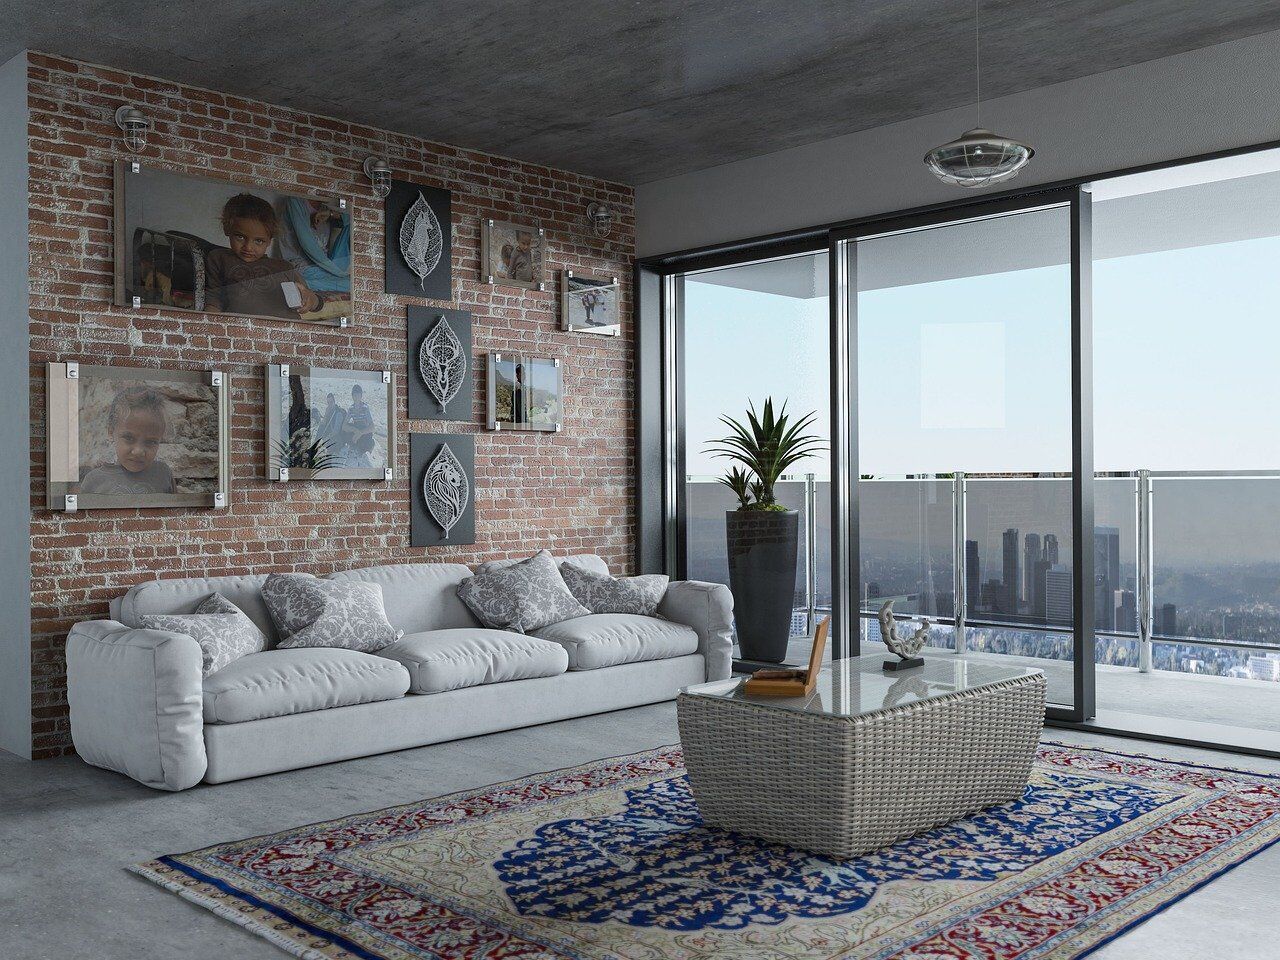 Modern Apartment Features: What to Look For